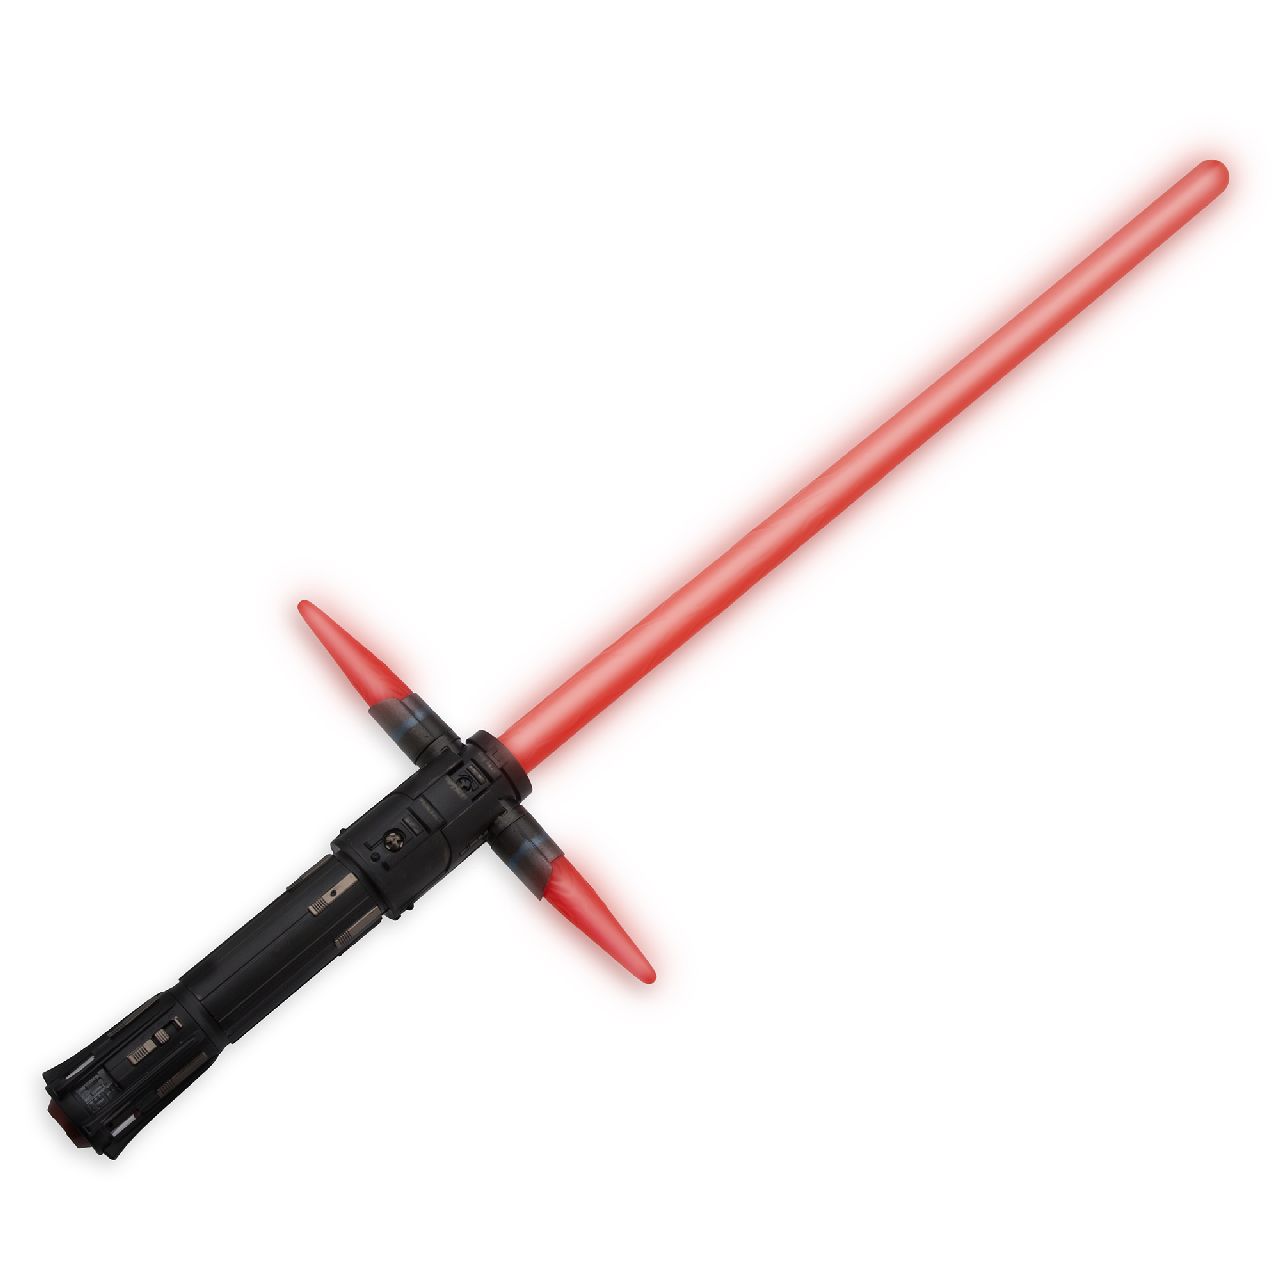 Star Wars: The Force Awakens Toys 